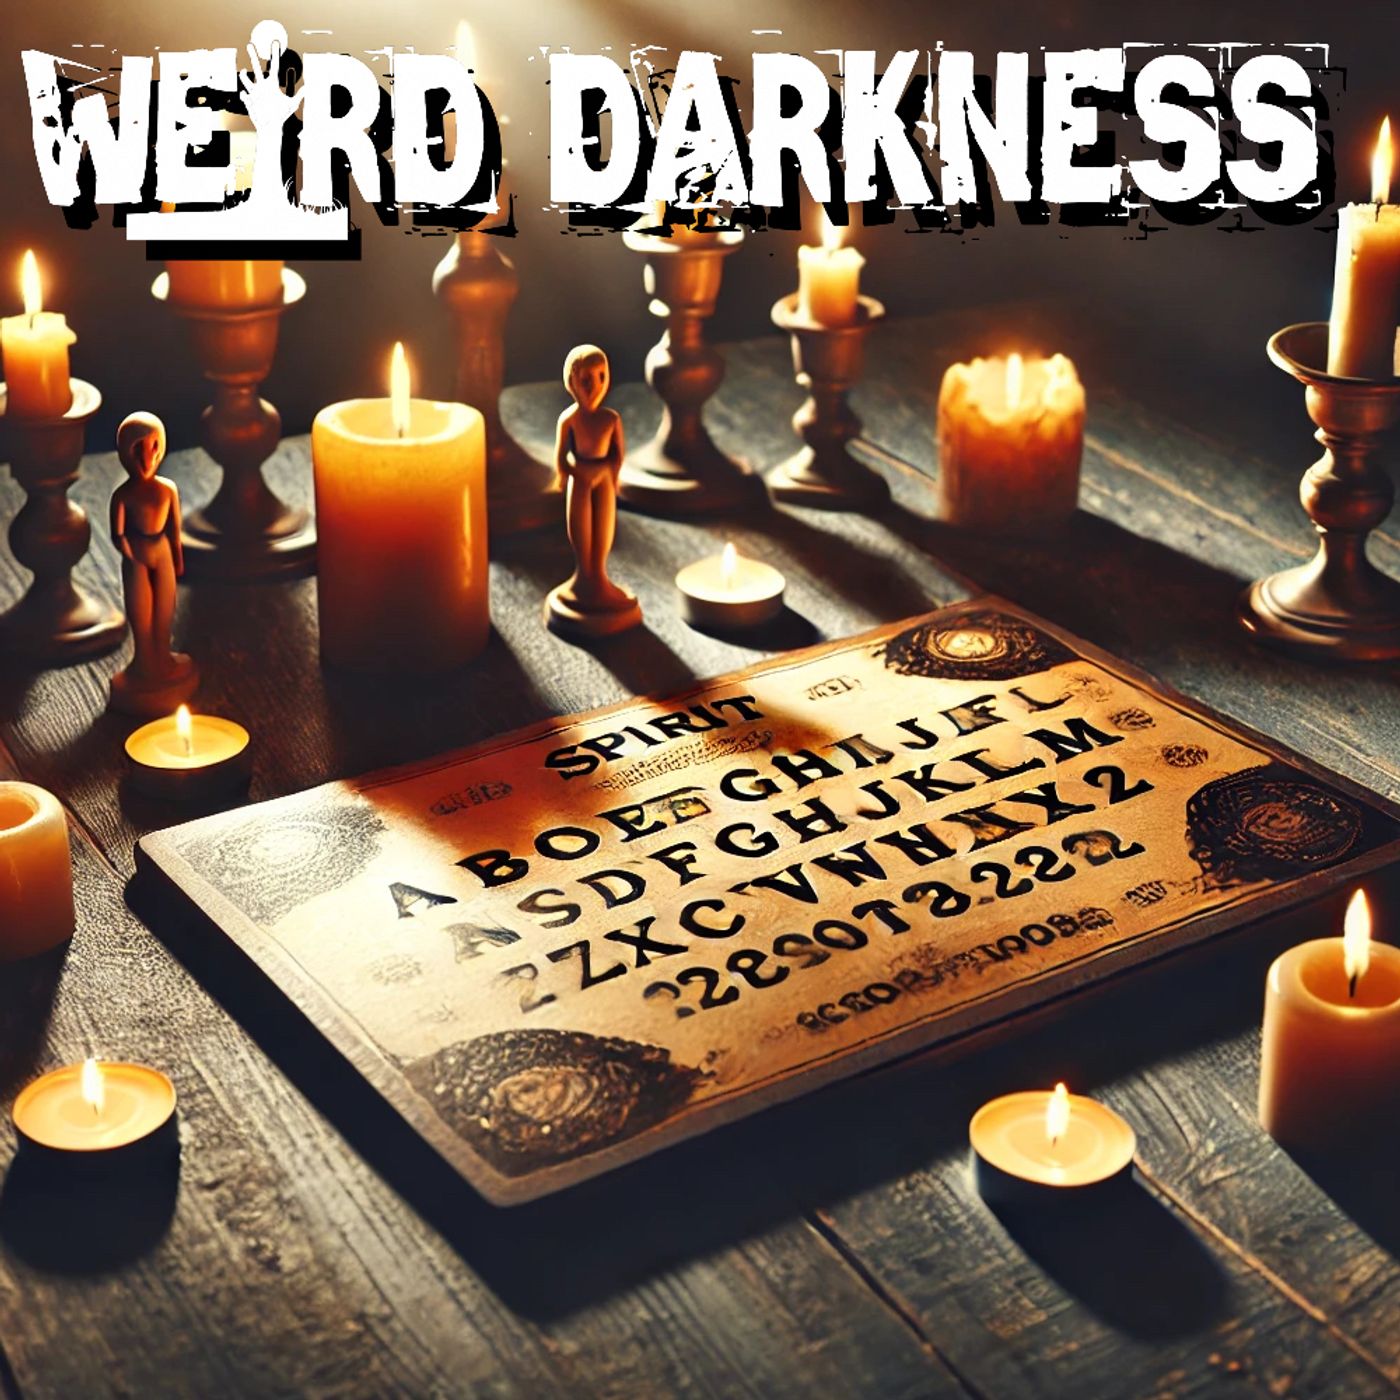 “CHANNELING THE POWER OF THE DEAD” and More True Chills plus a Creepypasta! #WeirdDarkness #Darkives